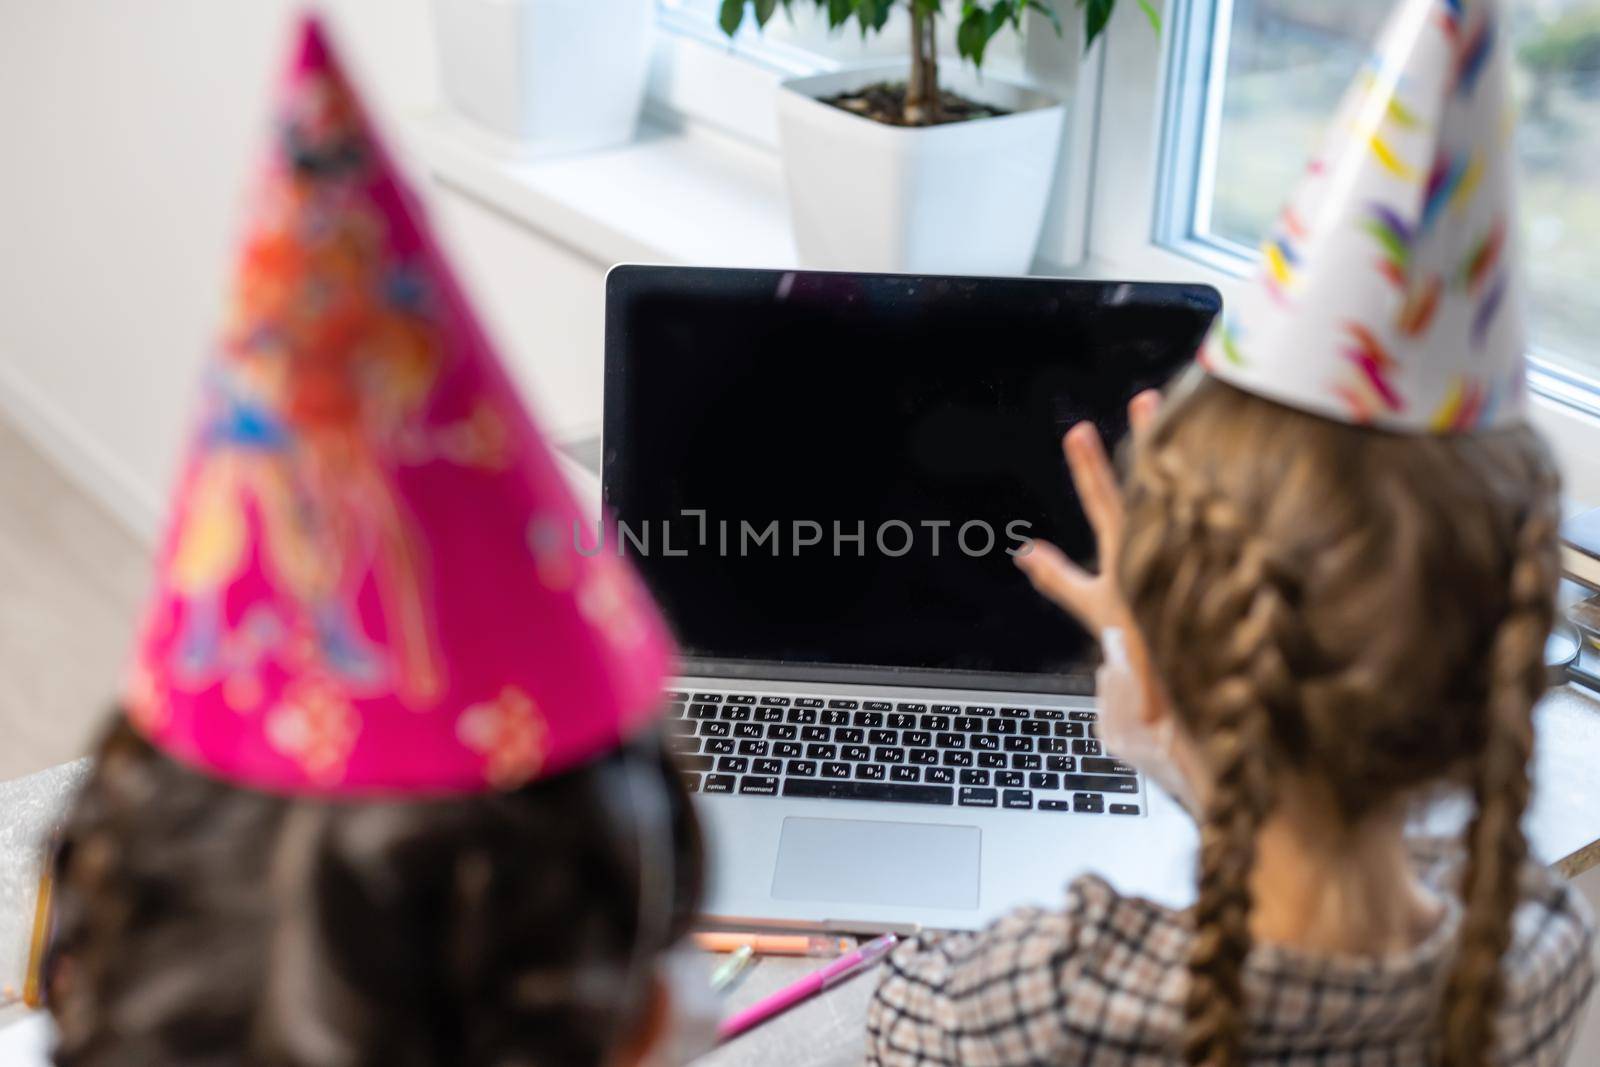 Happy family with two sibling celebrating birthday via internet in quarantine time, self-isolation and family values, online birthday party by Andelov13